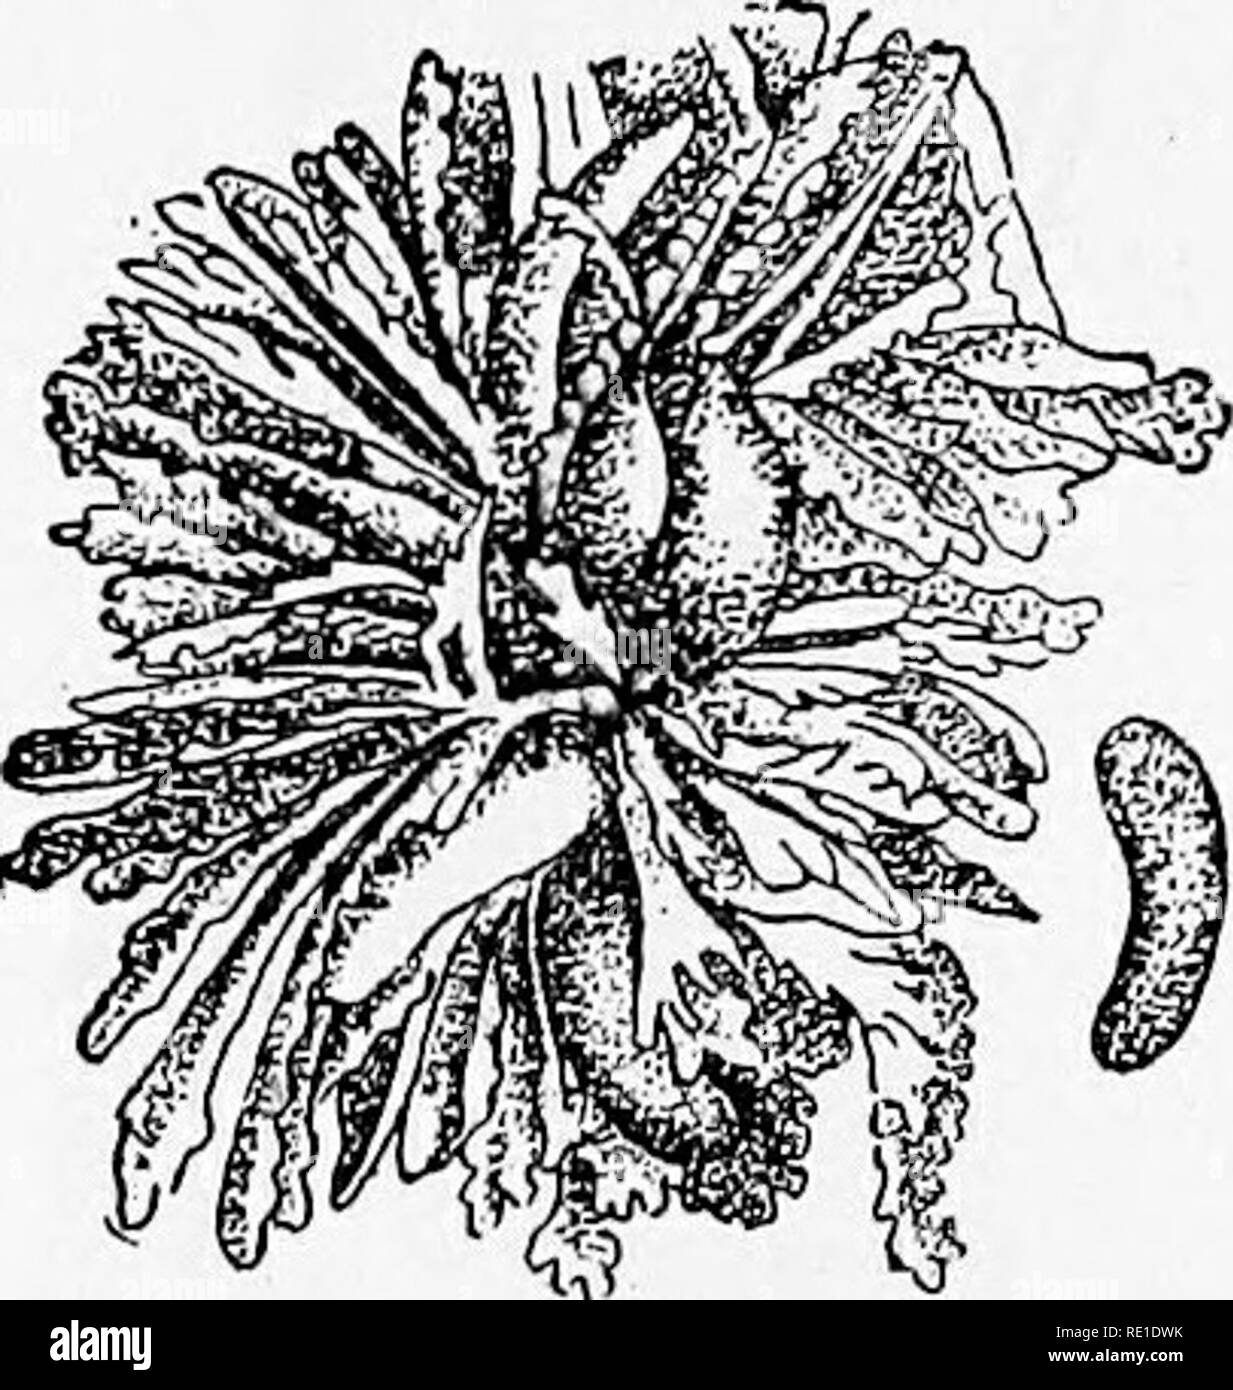 . Special report on diseases of cattle. Cattle. Fig. 17.—Portion of the wall of the first stomach witli conical flukes attached- Several species of roundworms may occur in the fourth stomach. Two of these are of special importance. THE TWISTED STOMACH WORM (H^MONCHUS CONTORTUS). The twisted stomach worm {Ila-monchus contorhcs, figs. 18, 19, 20) is sometimes found in enormous numbers in the fourth stomach of cattle. Slieep, goats, and other ruminants may also be infested with it.  Among tlie sj^mptoms caused by tliis parasite may be mentioned anemia, loss of flesh, general weakness, dullness, c Stock Photo